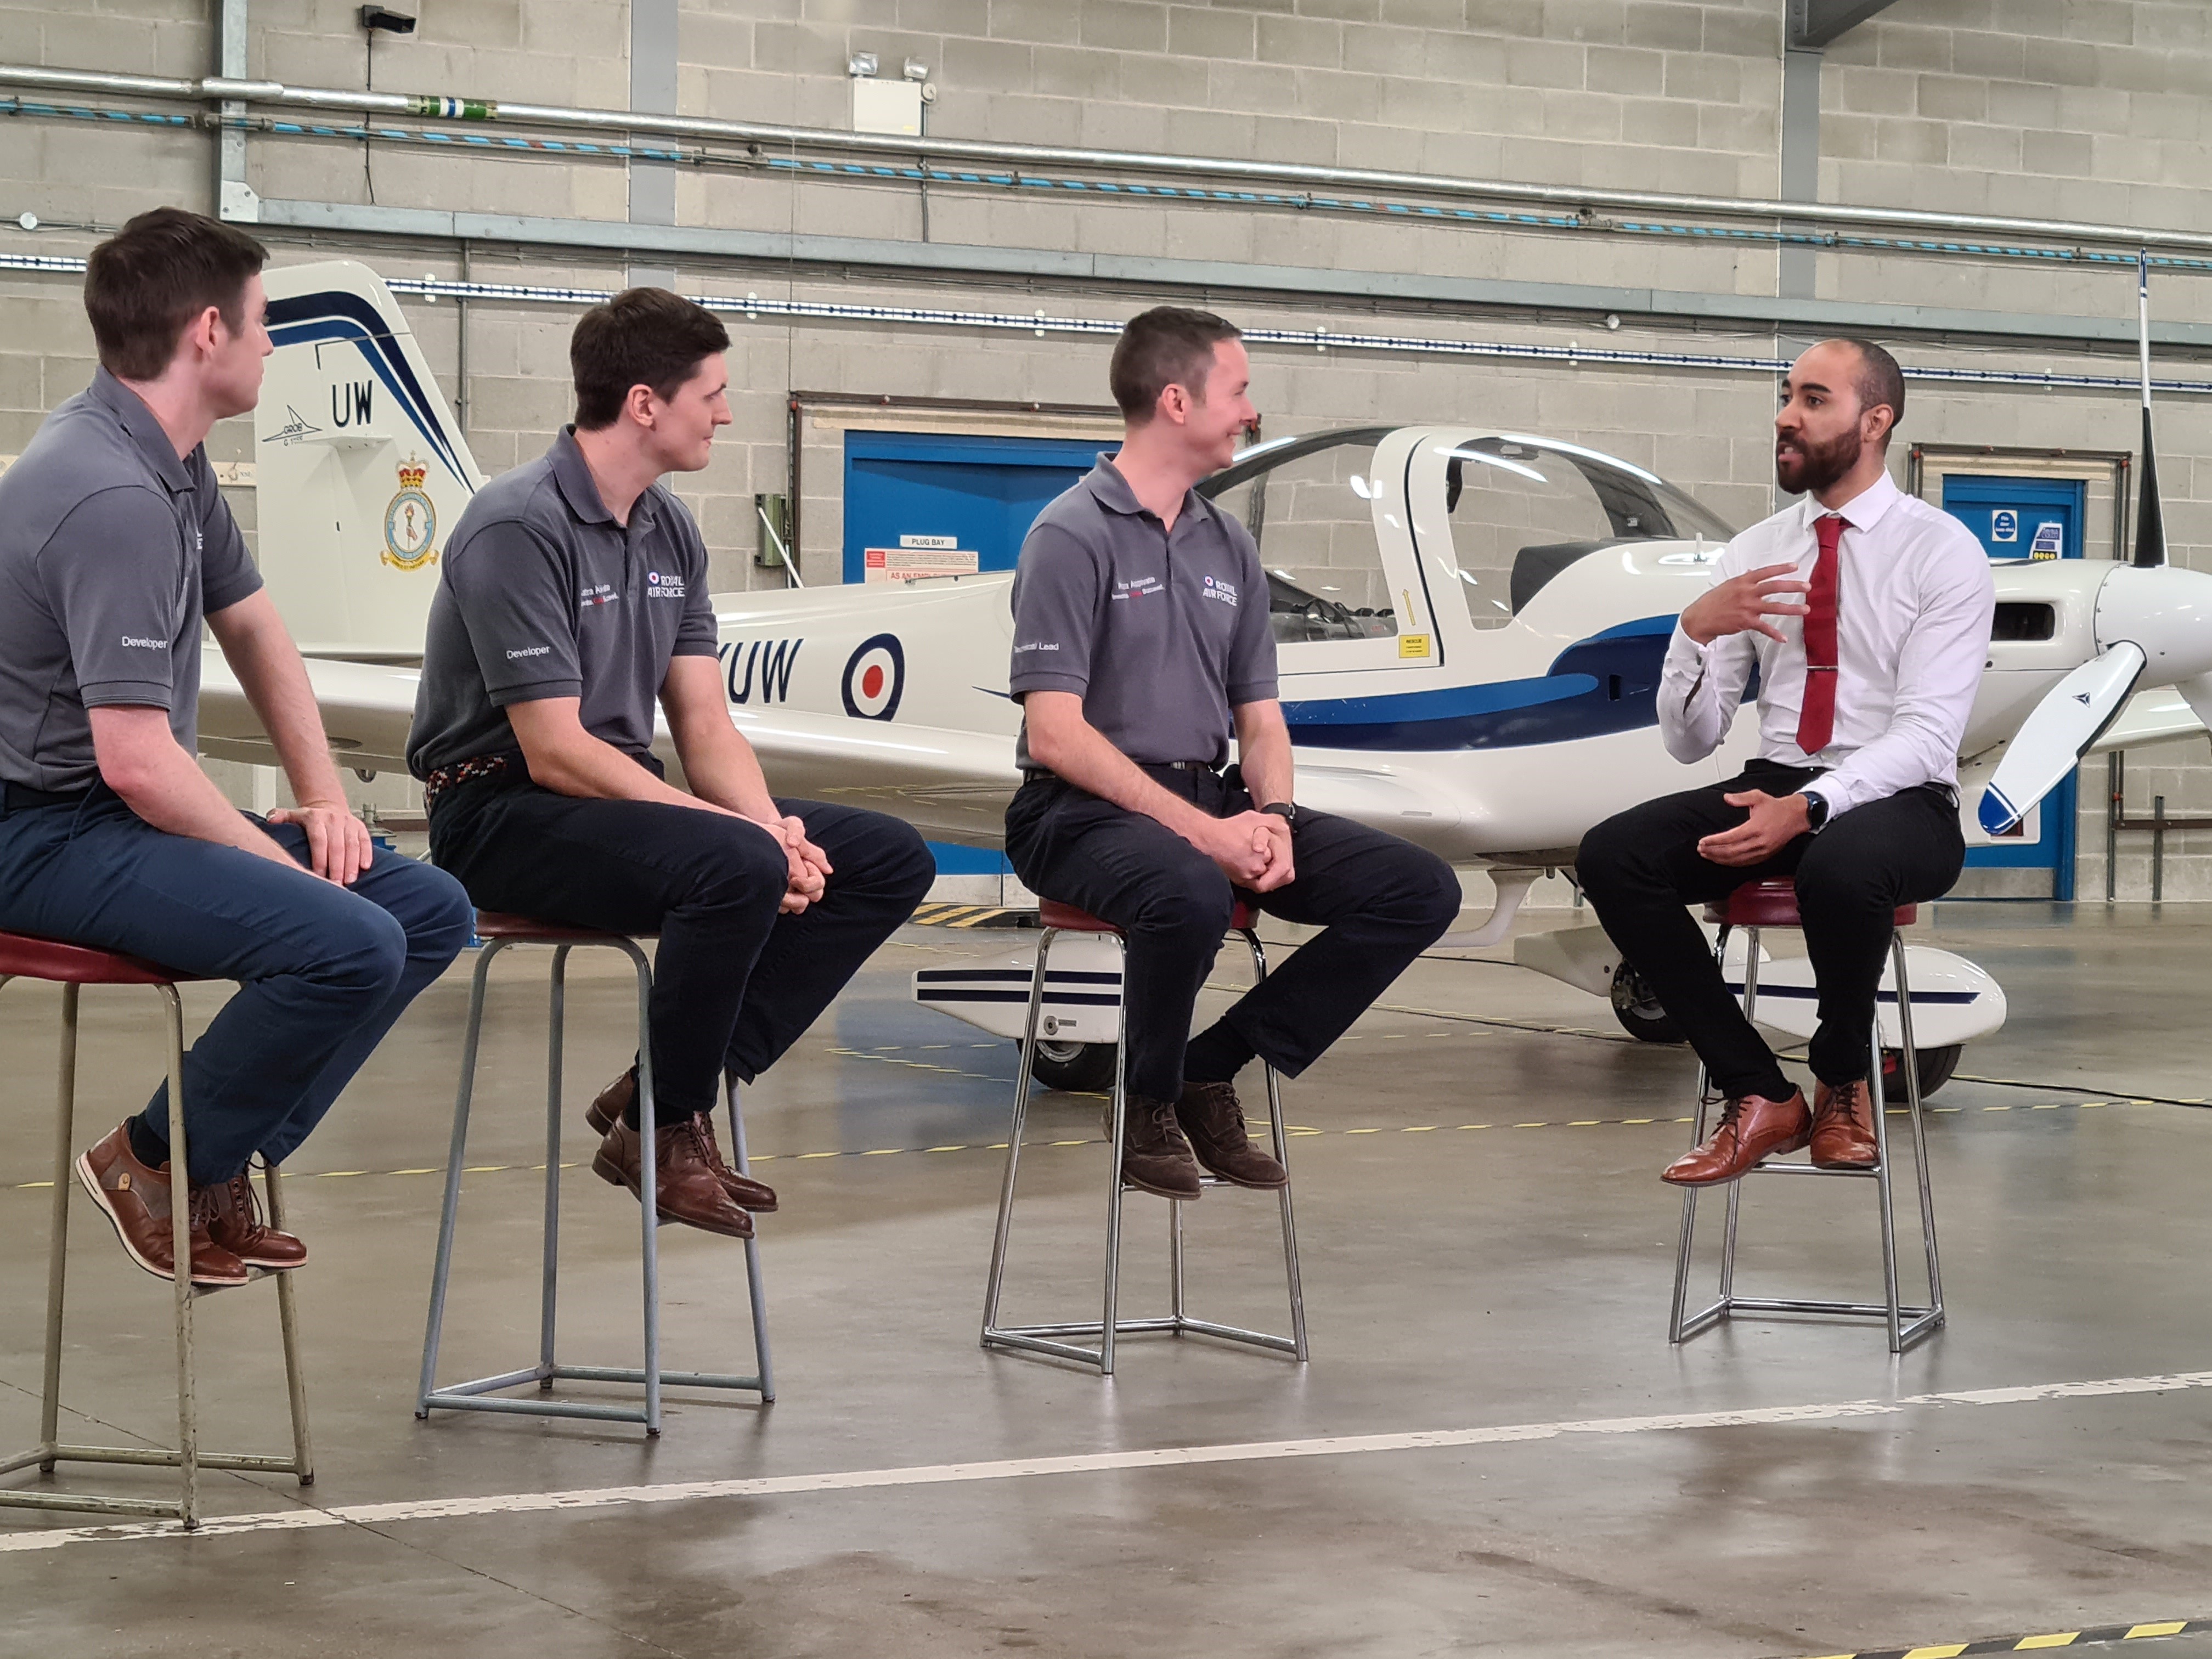 Personnel sit on stools in an aircraft hangar, with interviewer.